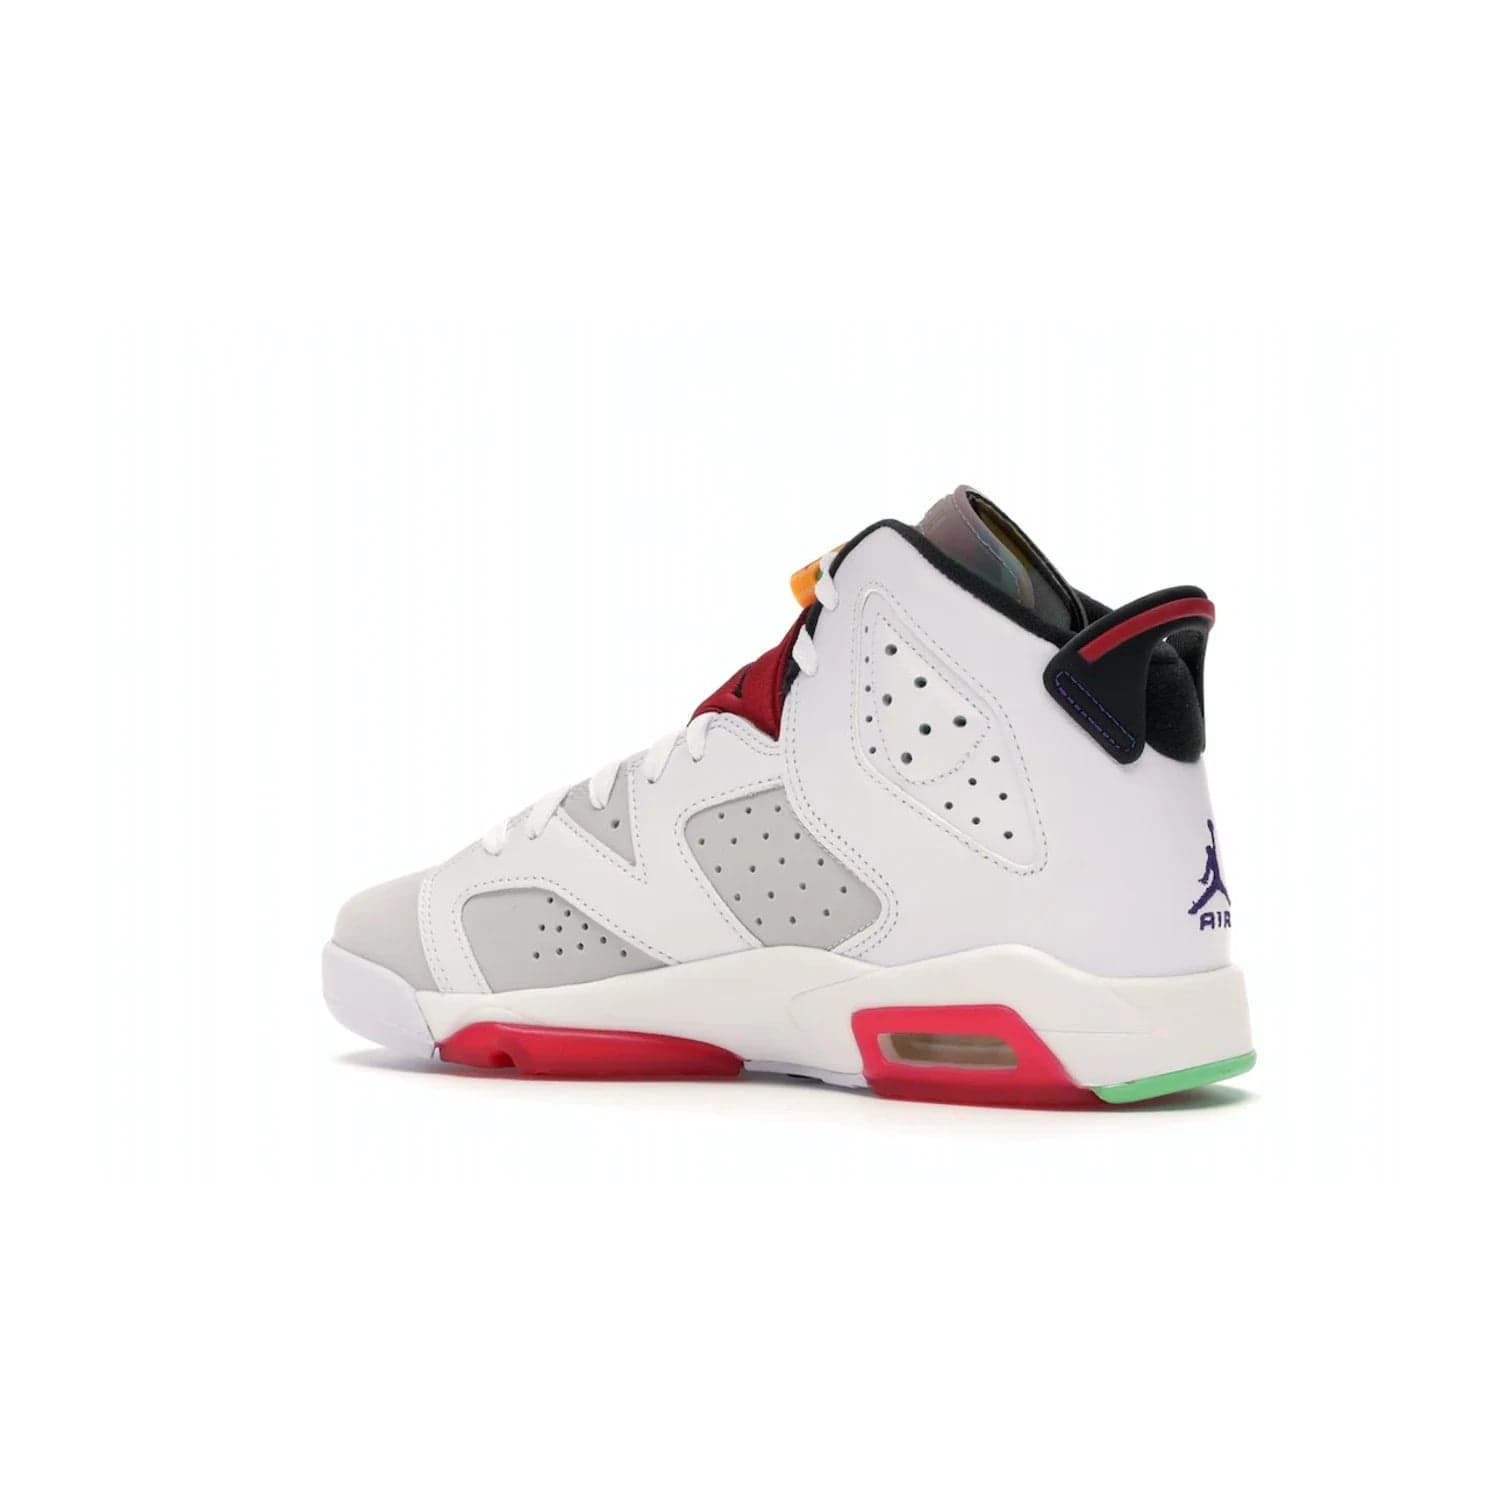 Jordan 6 Retro Hare (GS) - Image 22 - Only at www.BallersClubKickz.com - The Air Jordan 6 Hare GS. Comfortable suede upper, perforations, red pods, two-tone midsole, and signature "Jumpman" emblem. Released 17 June 2020. Perfect for any sneakerhead.